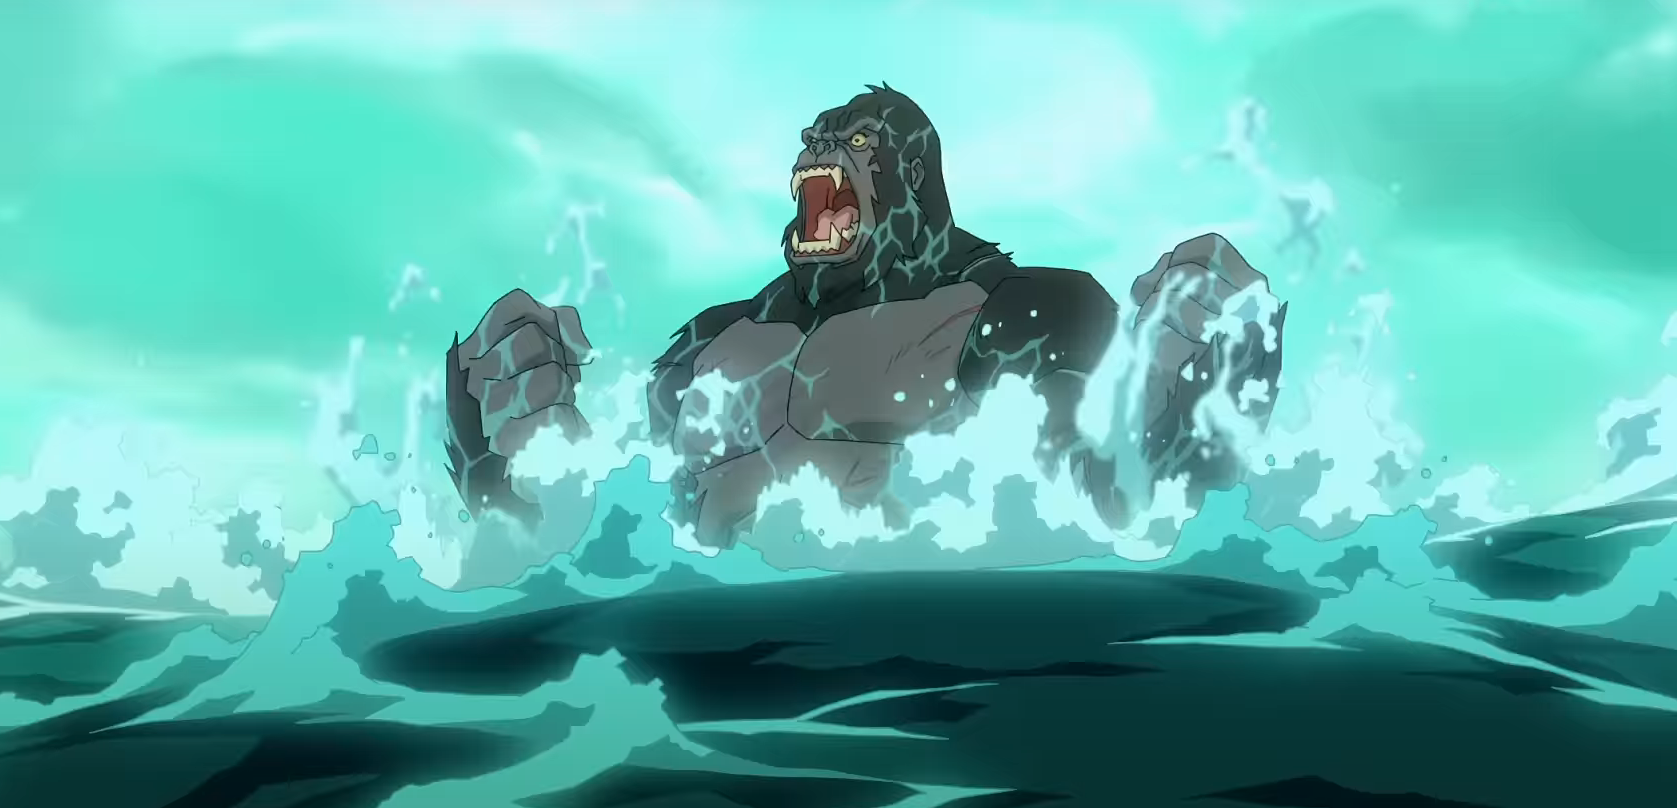 ‘Skull Island’ Trailer: King Kong Dominates All In Netflix And Legendary’s MonsterVerse Series This Month